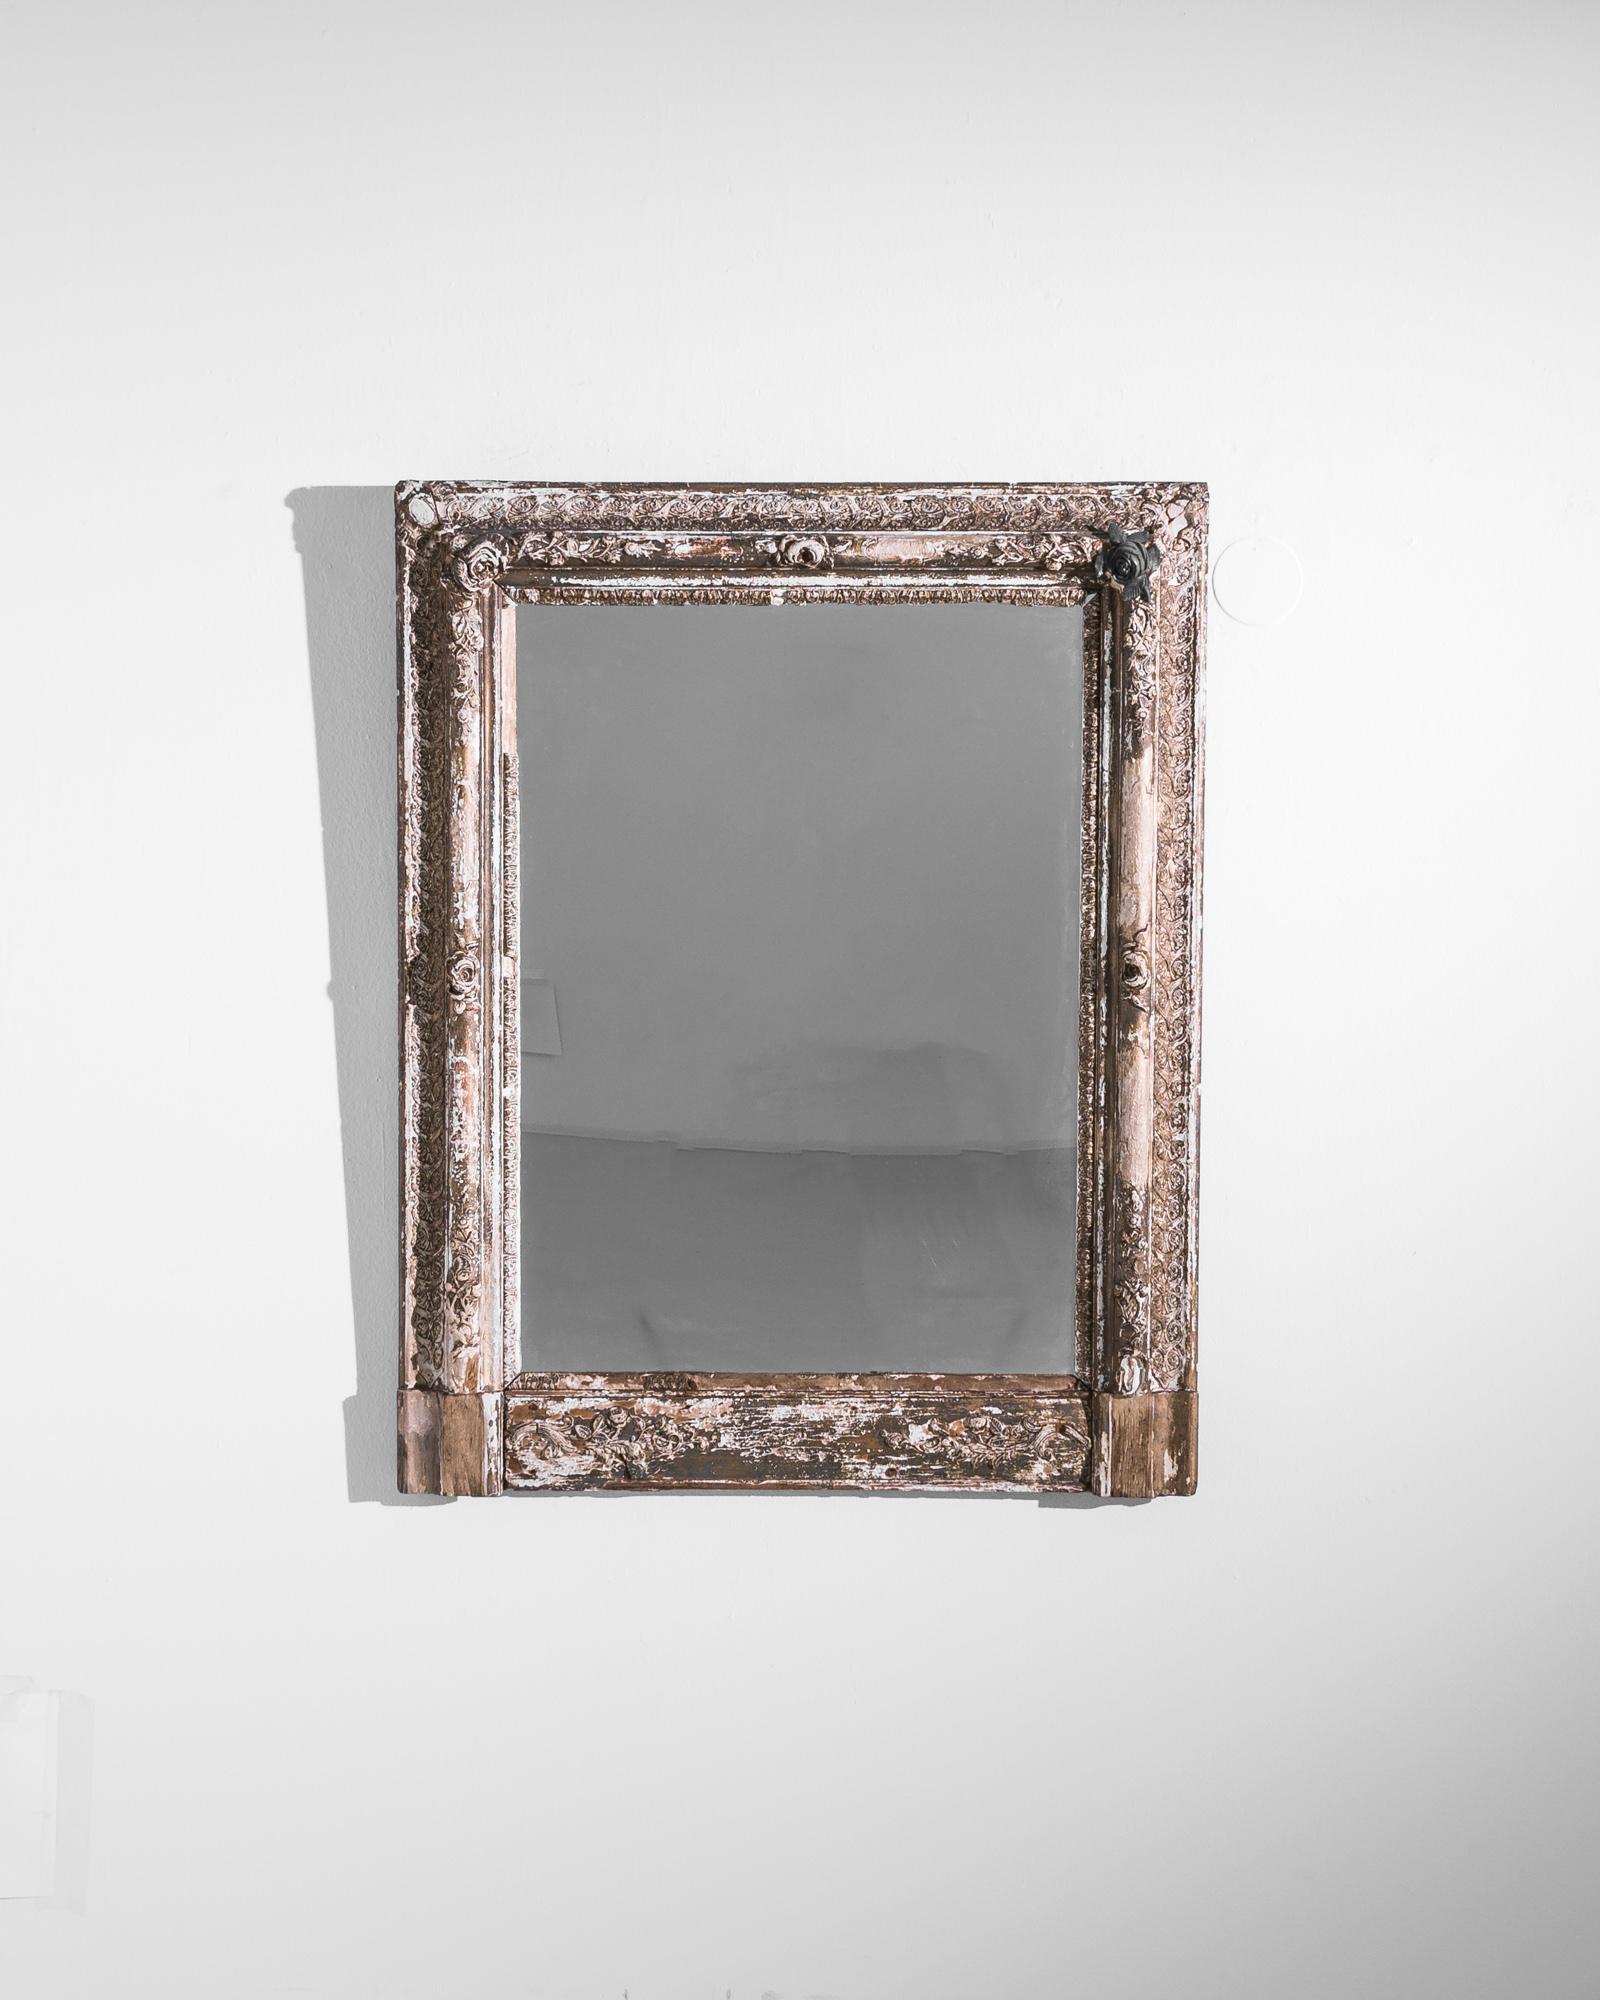 A white patinated wood framed mirror from France, produced circa 1900. A provincial french find is adorned with an evocative black rose, set in a deep frame of milky white wood. Chips in the original patination, and a sliver of silver backing, add